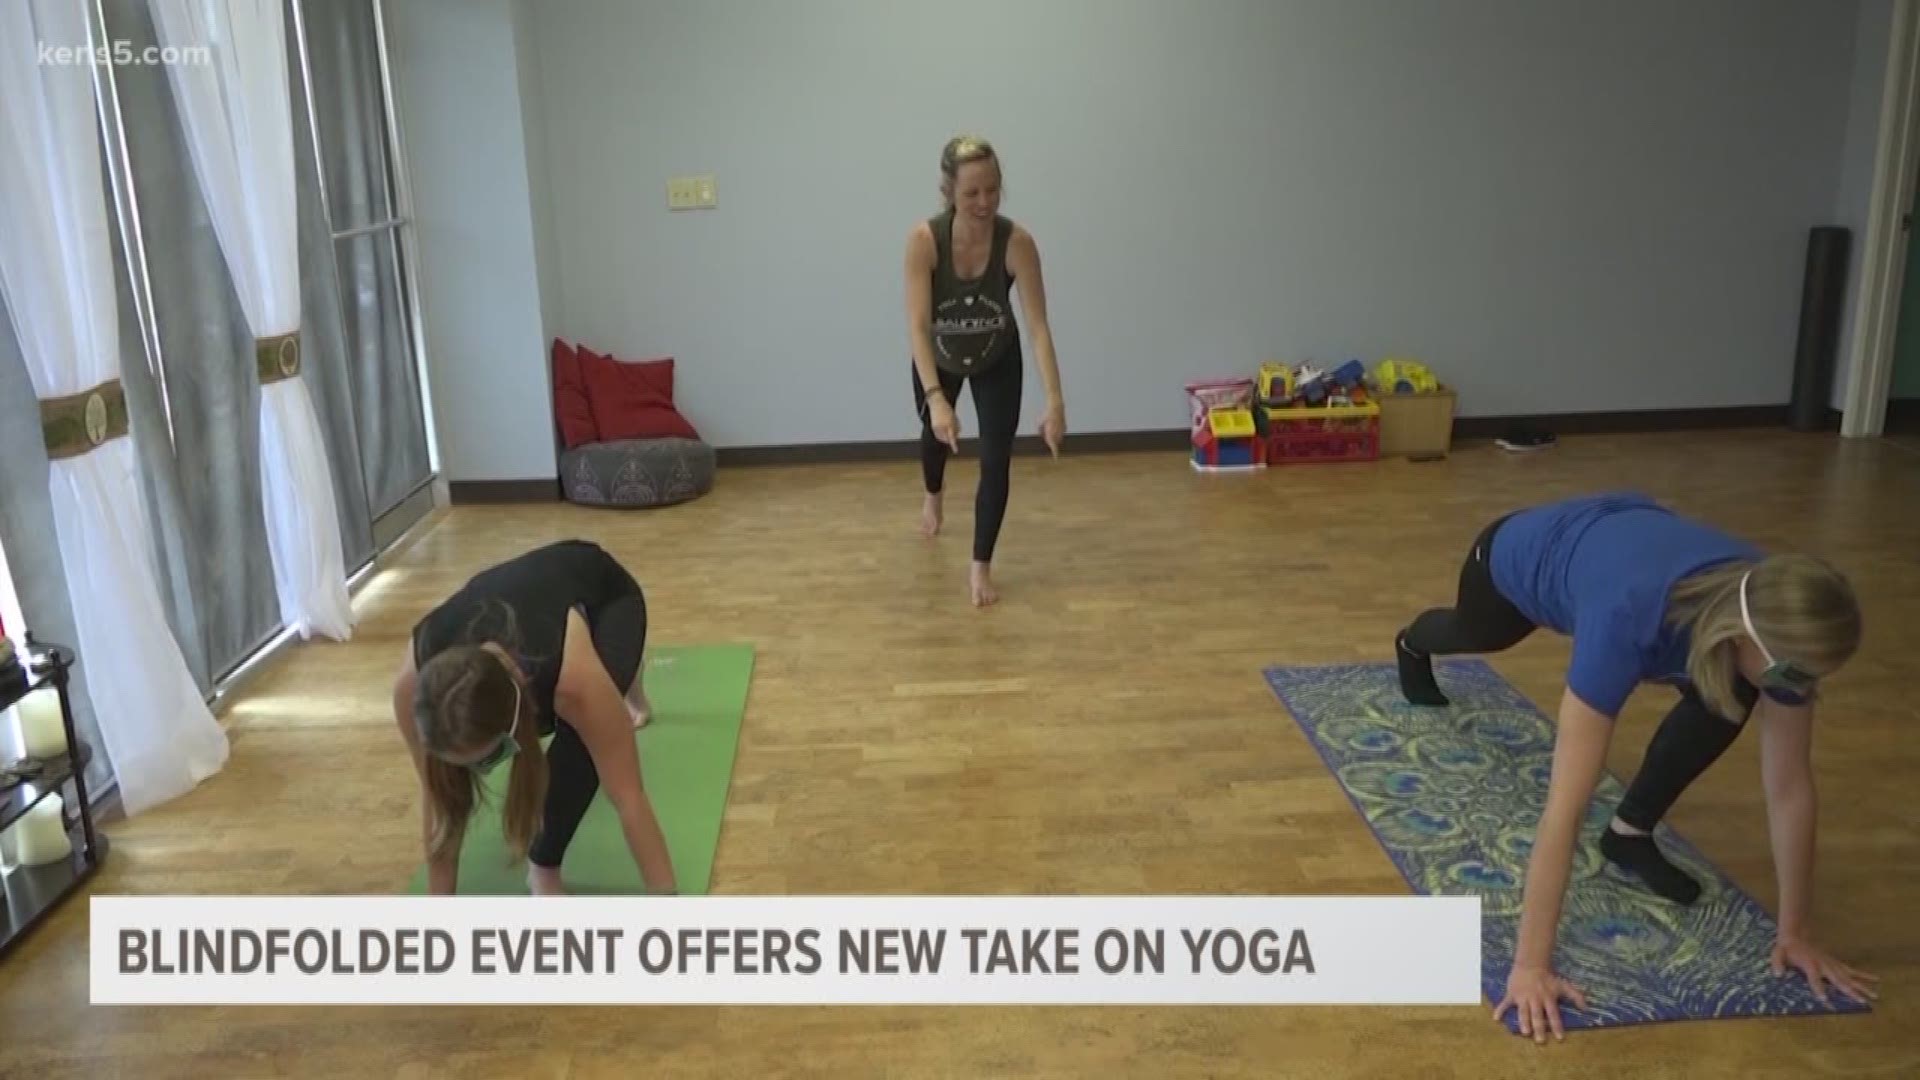 It's a yoga class that's out of the ordinary. Leah Durain shares how a unique session offered at a San Antonio yoga studio is raising awareness for preventable health issues.